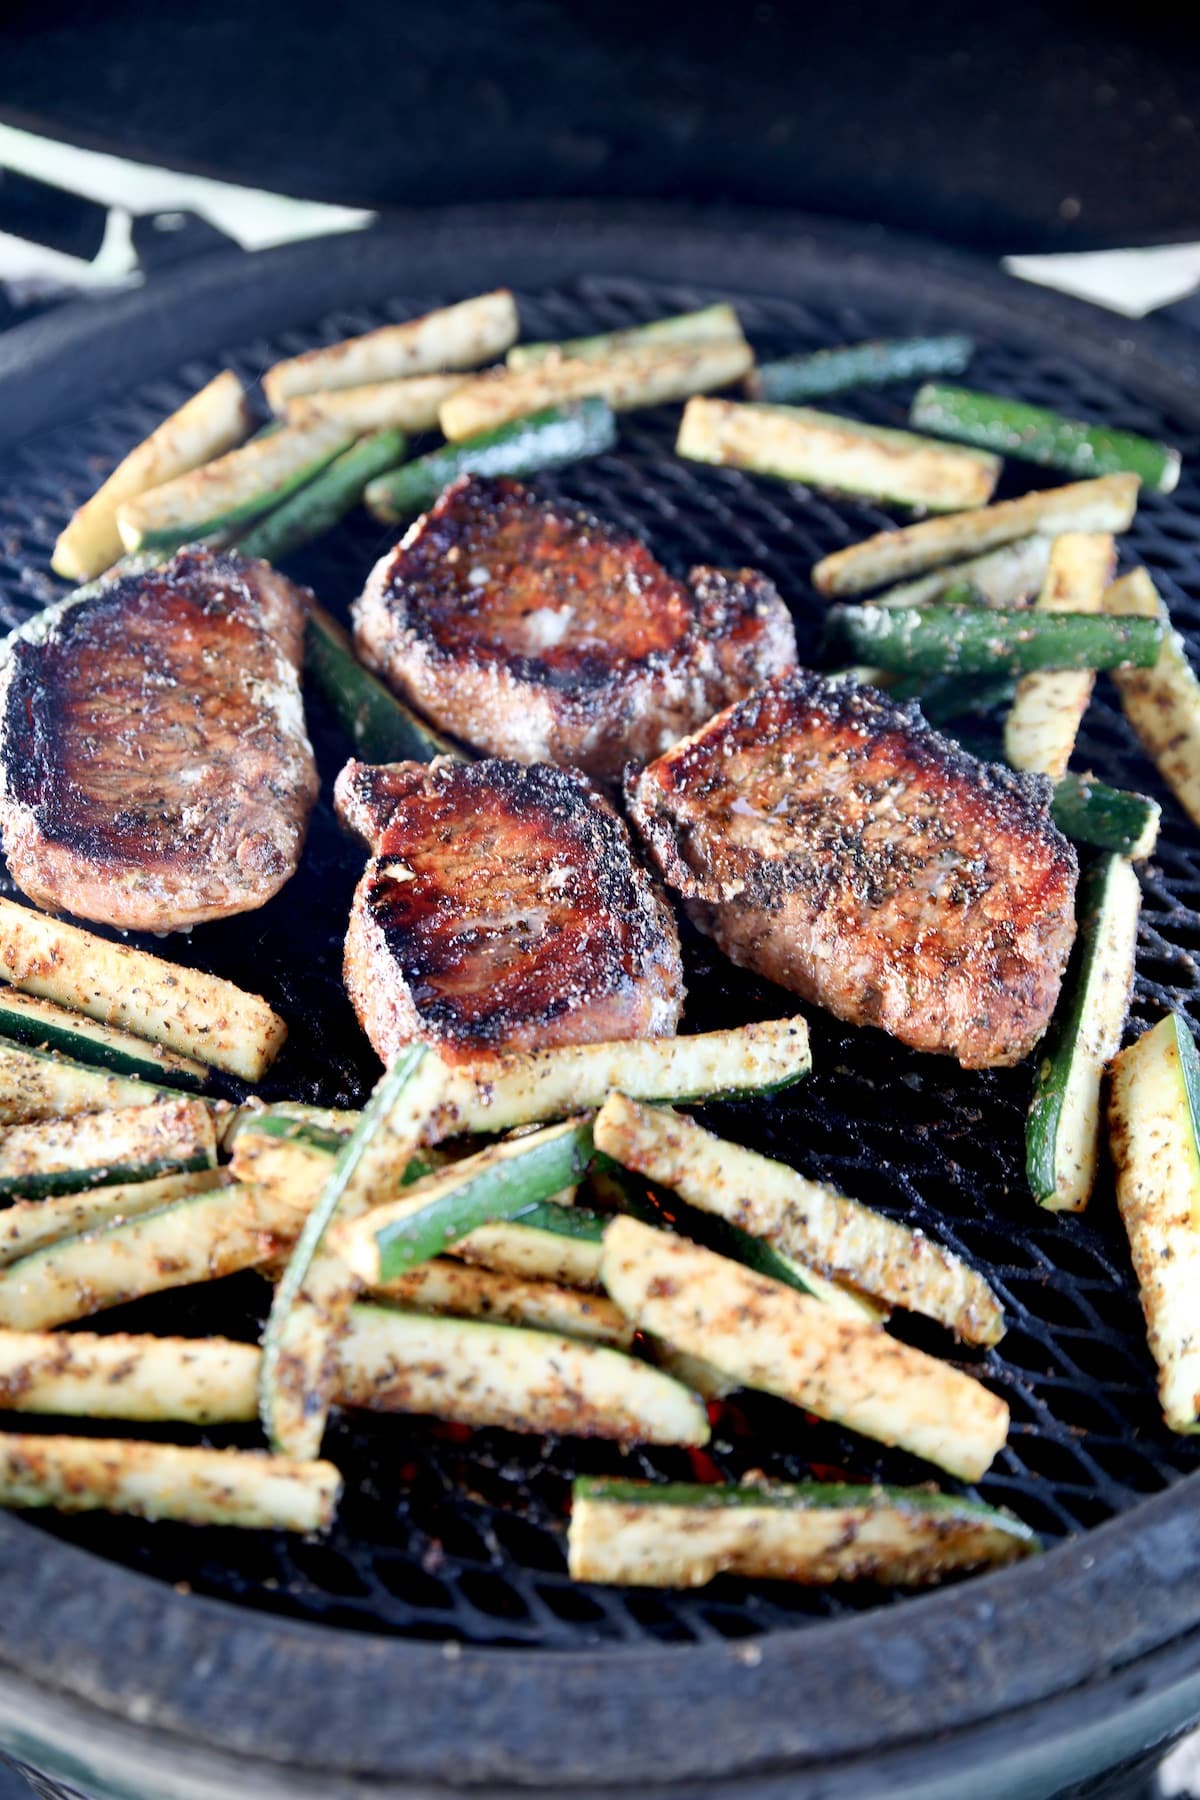 Grilled pork chops with zucchini on a grill.